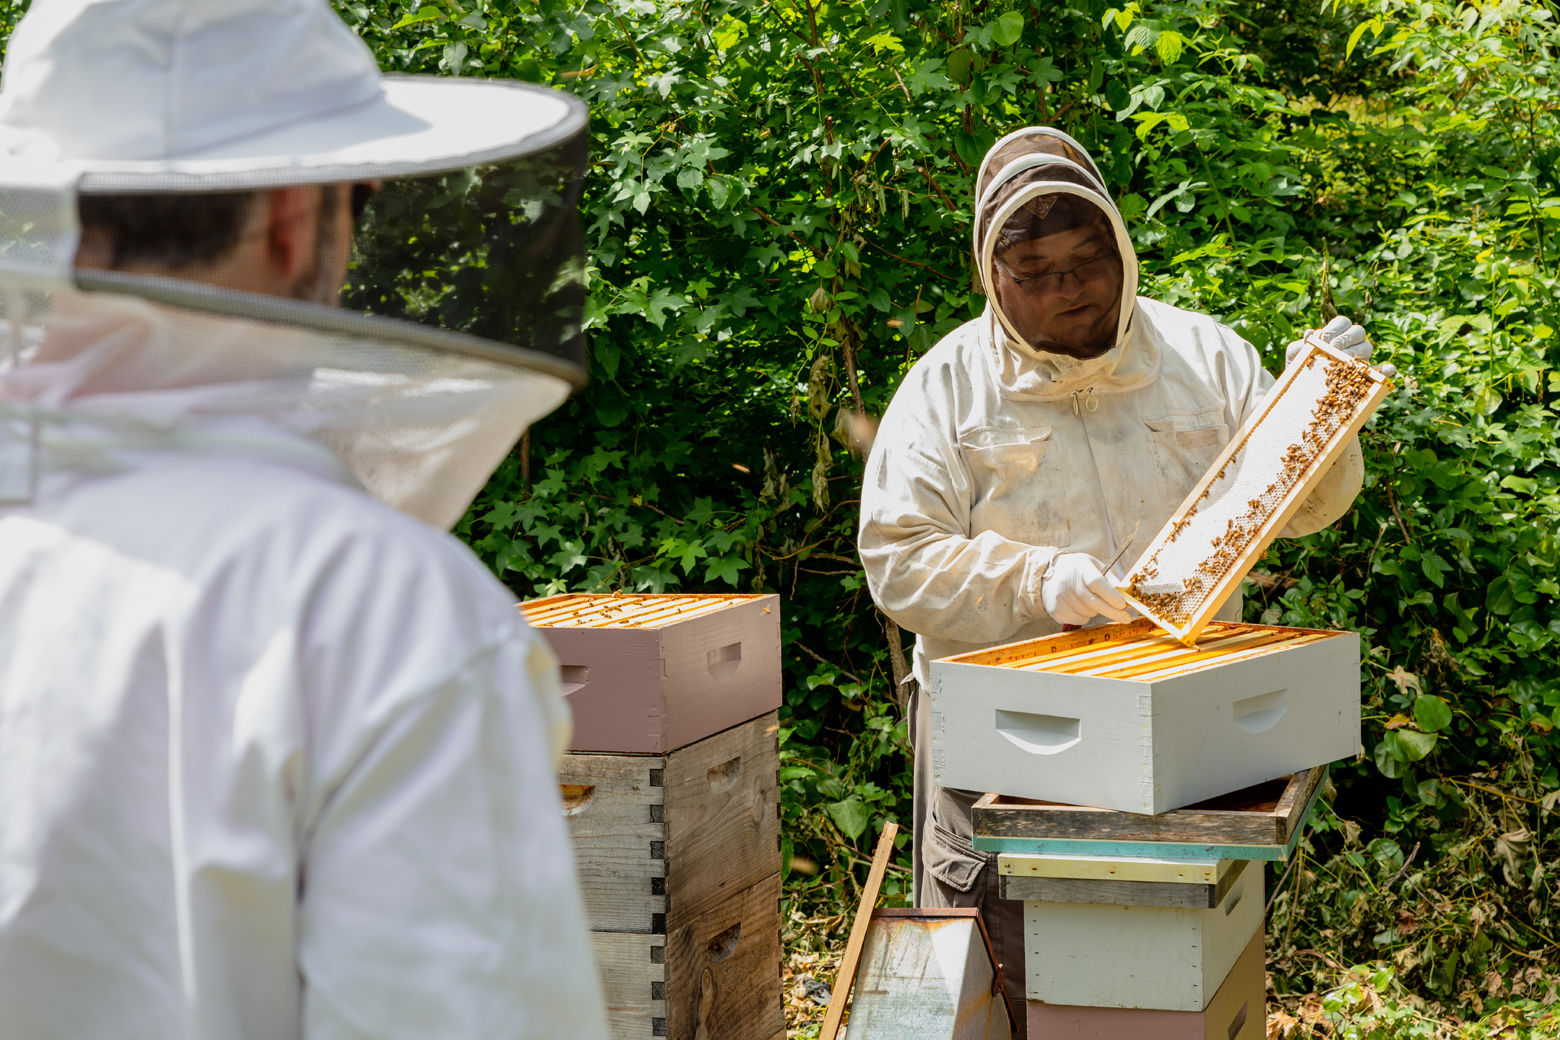 "You can’t just buy bees and a box to put them in, and throw them in your backyard. You really have to be educated on how to manage them properly," said John Ferree, the beekeeper at the Kennedy Center. (Courtesy Accor Hotels) 